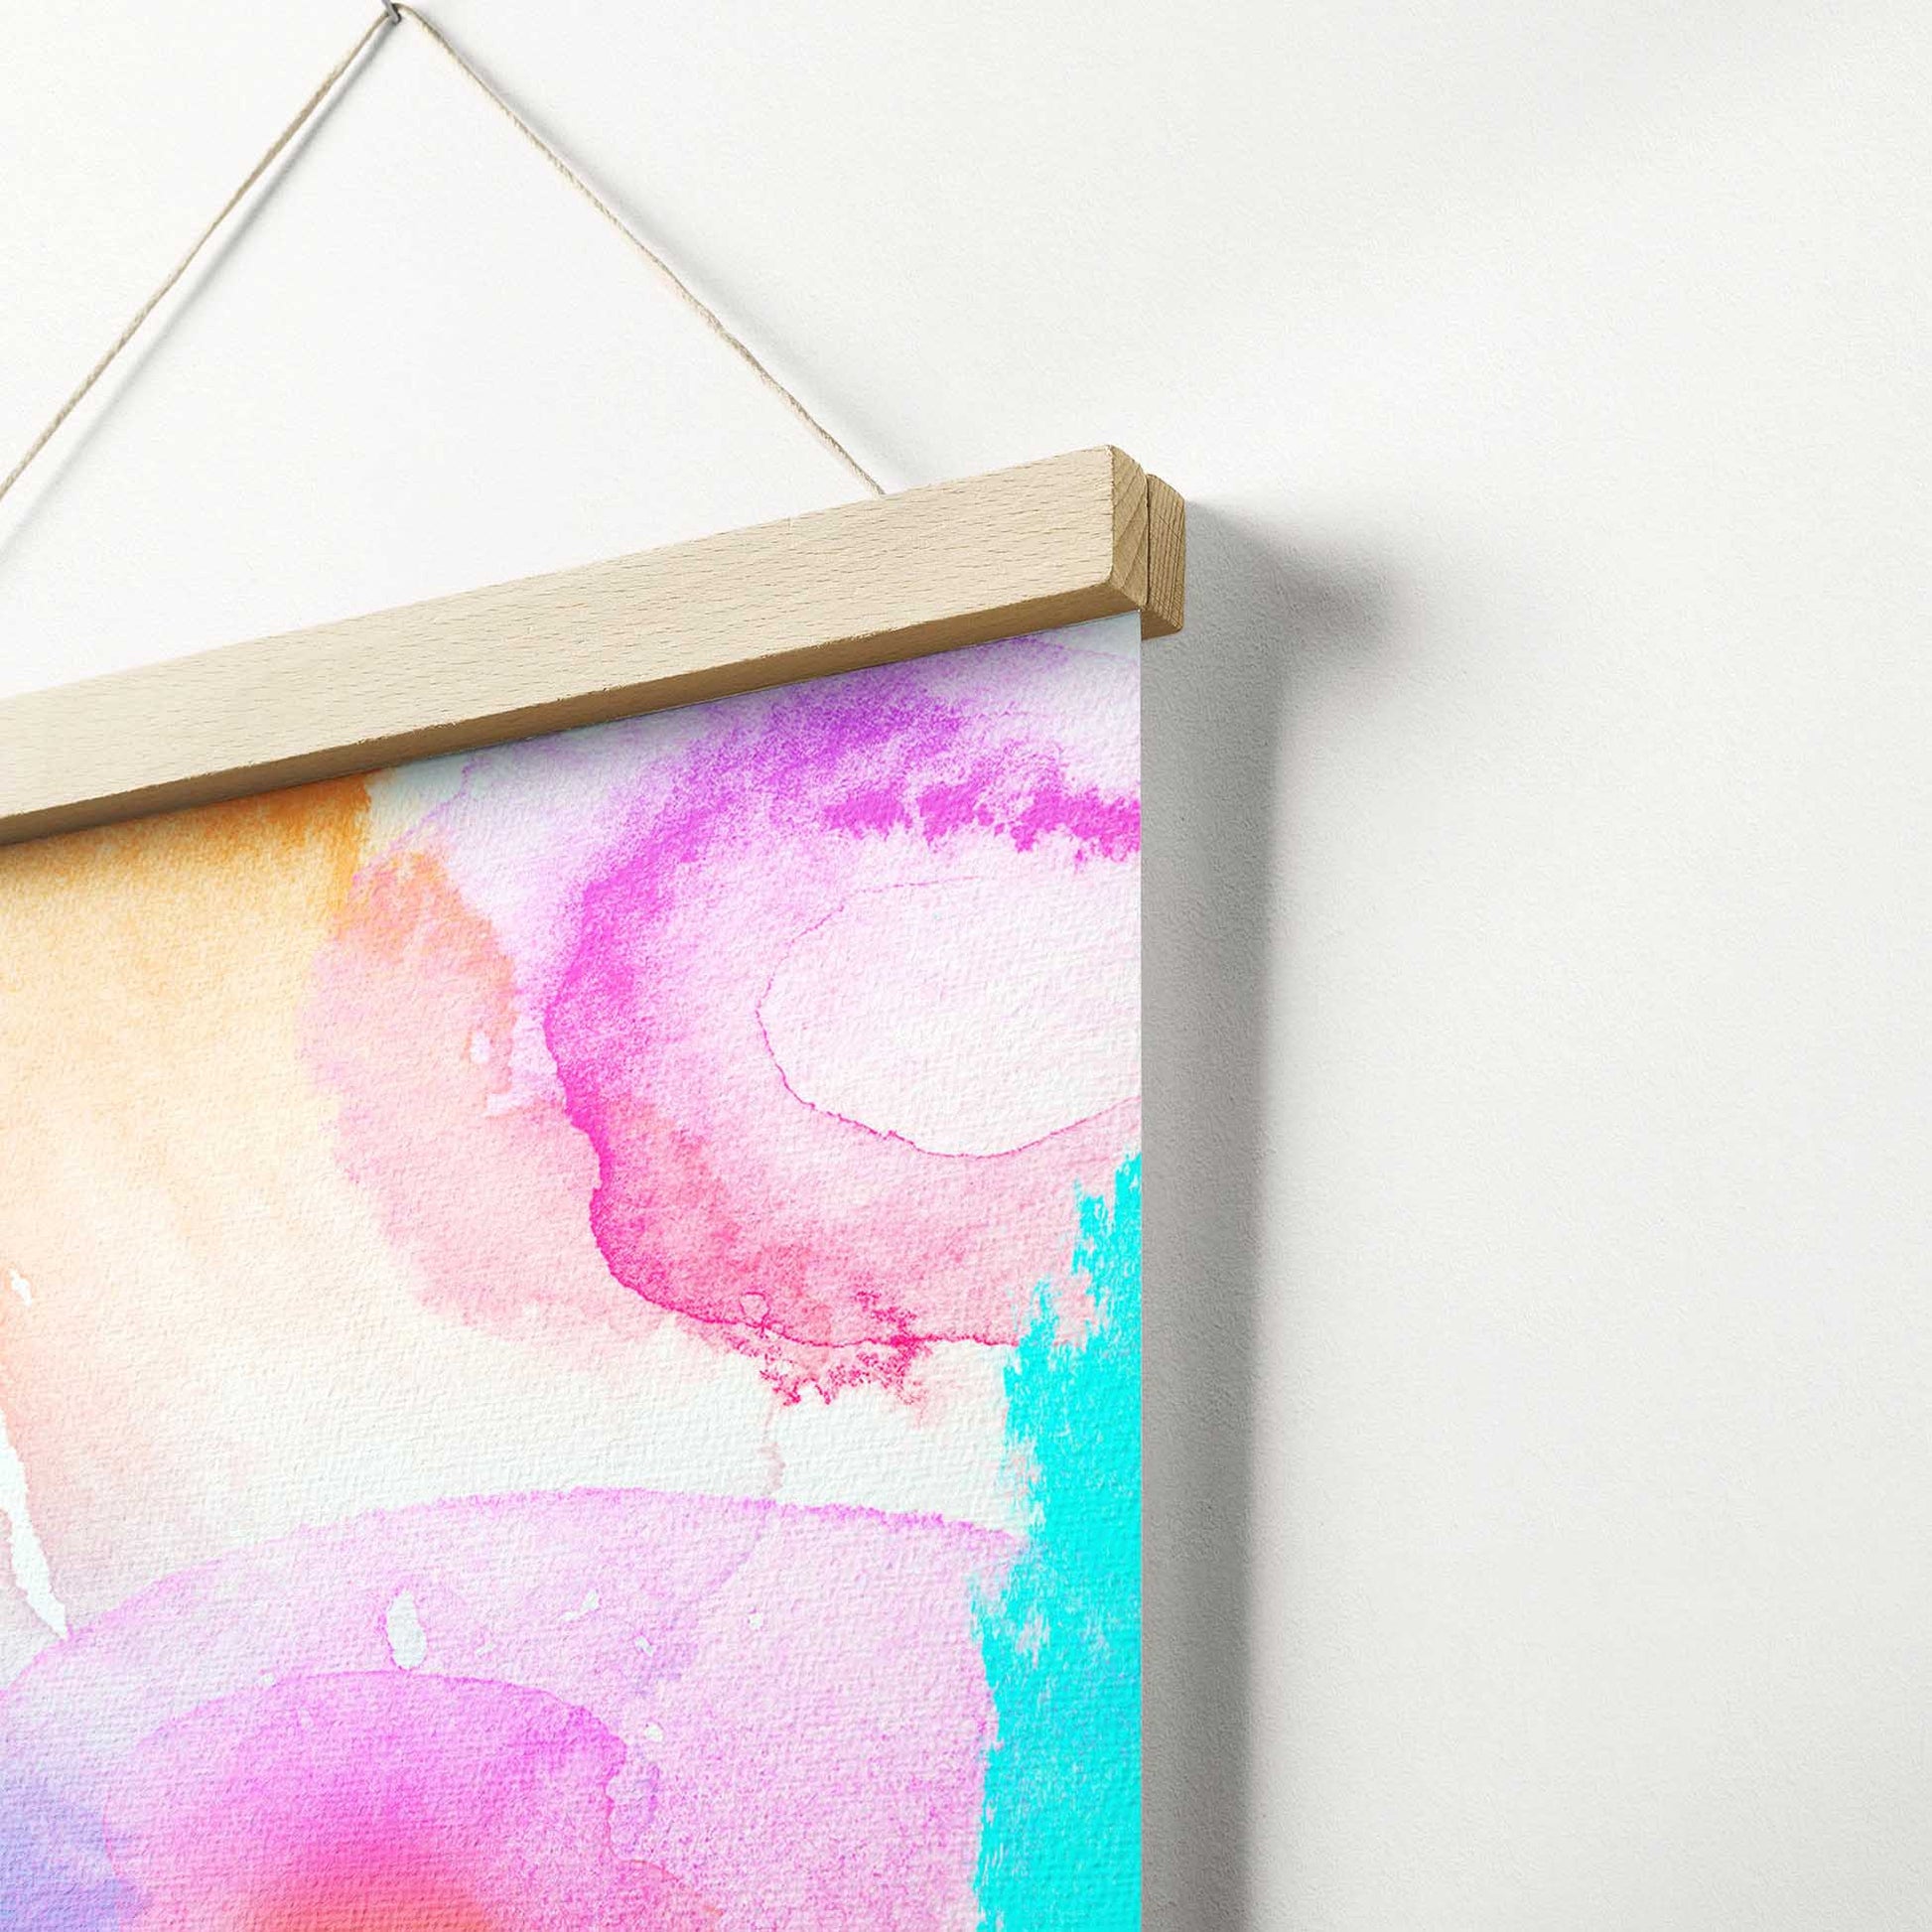 Embrace the nostalgia and timeless appeal of the Personalised Grunge FX Poster Hanger. Its retro grunge effect and halftone filter create a captivating visual experience that adds energy and a fun atmosphere to any room